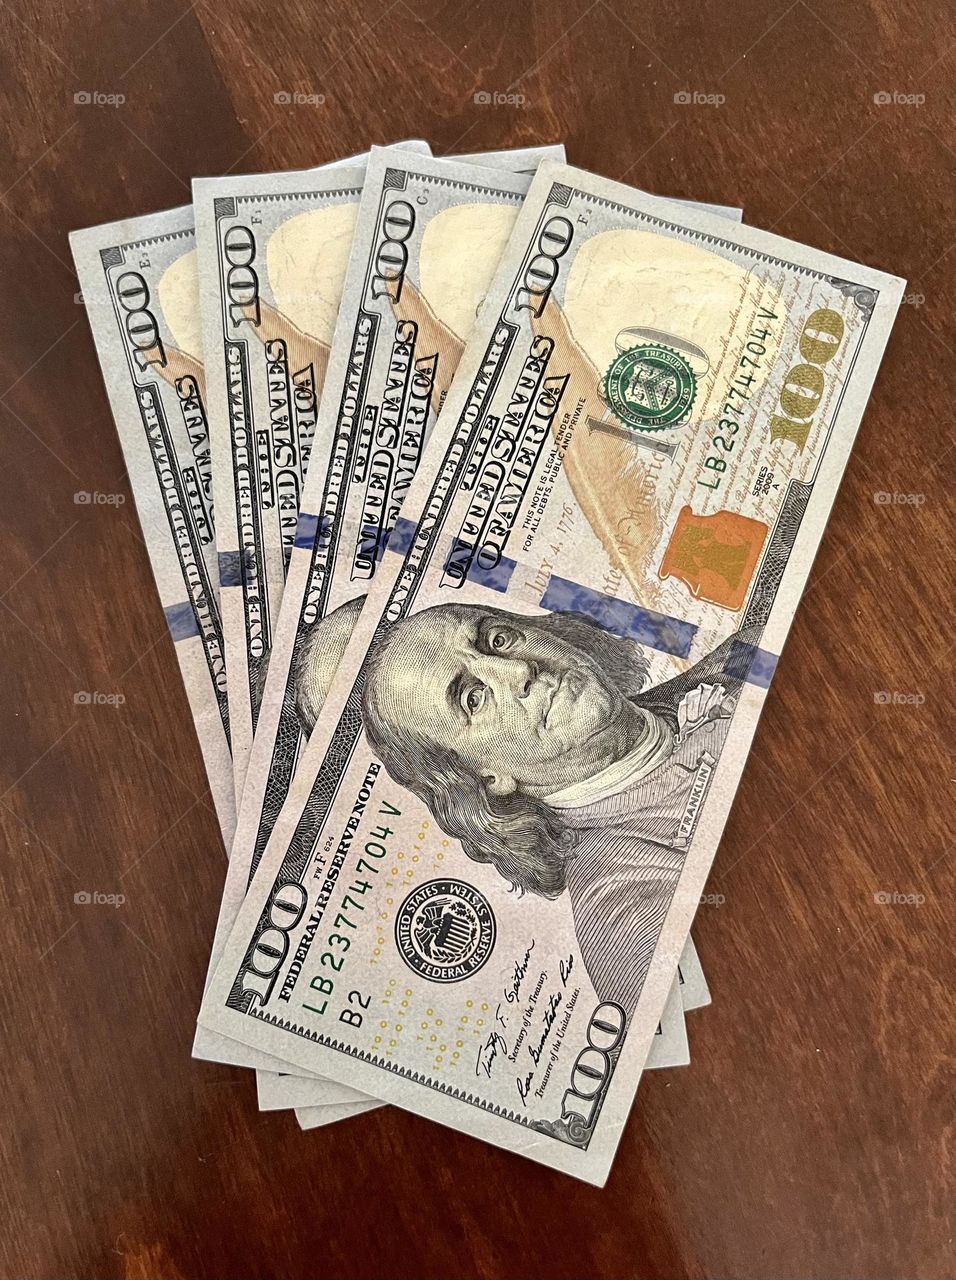 Four one hundred dollar bills fanned out on a wood table top.  Money to spend, work for, green money to earn with hard work.  Franklin is pictured.